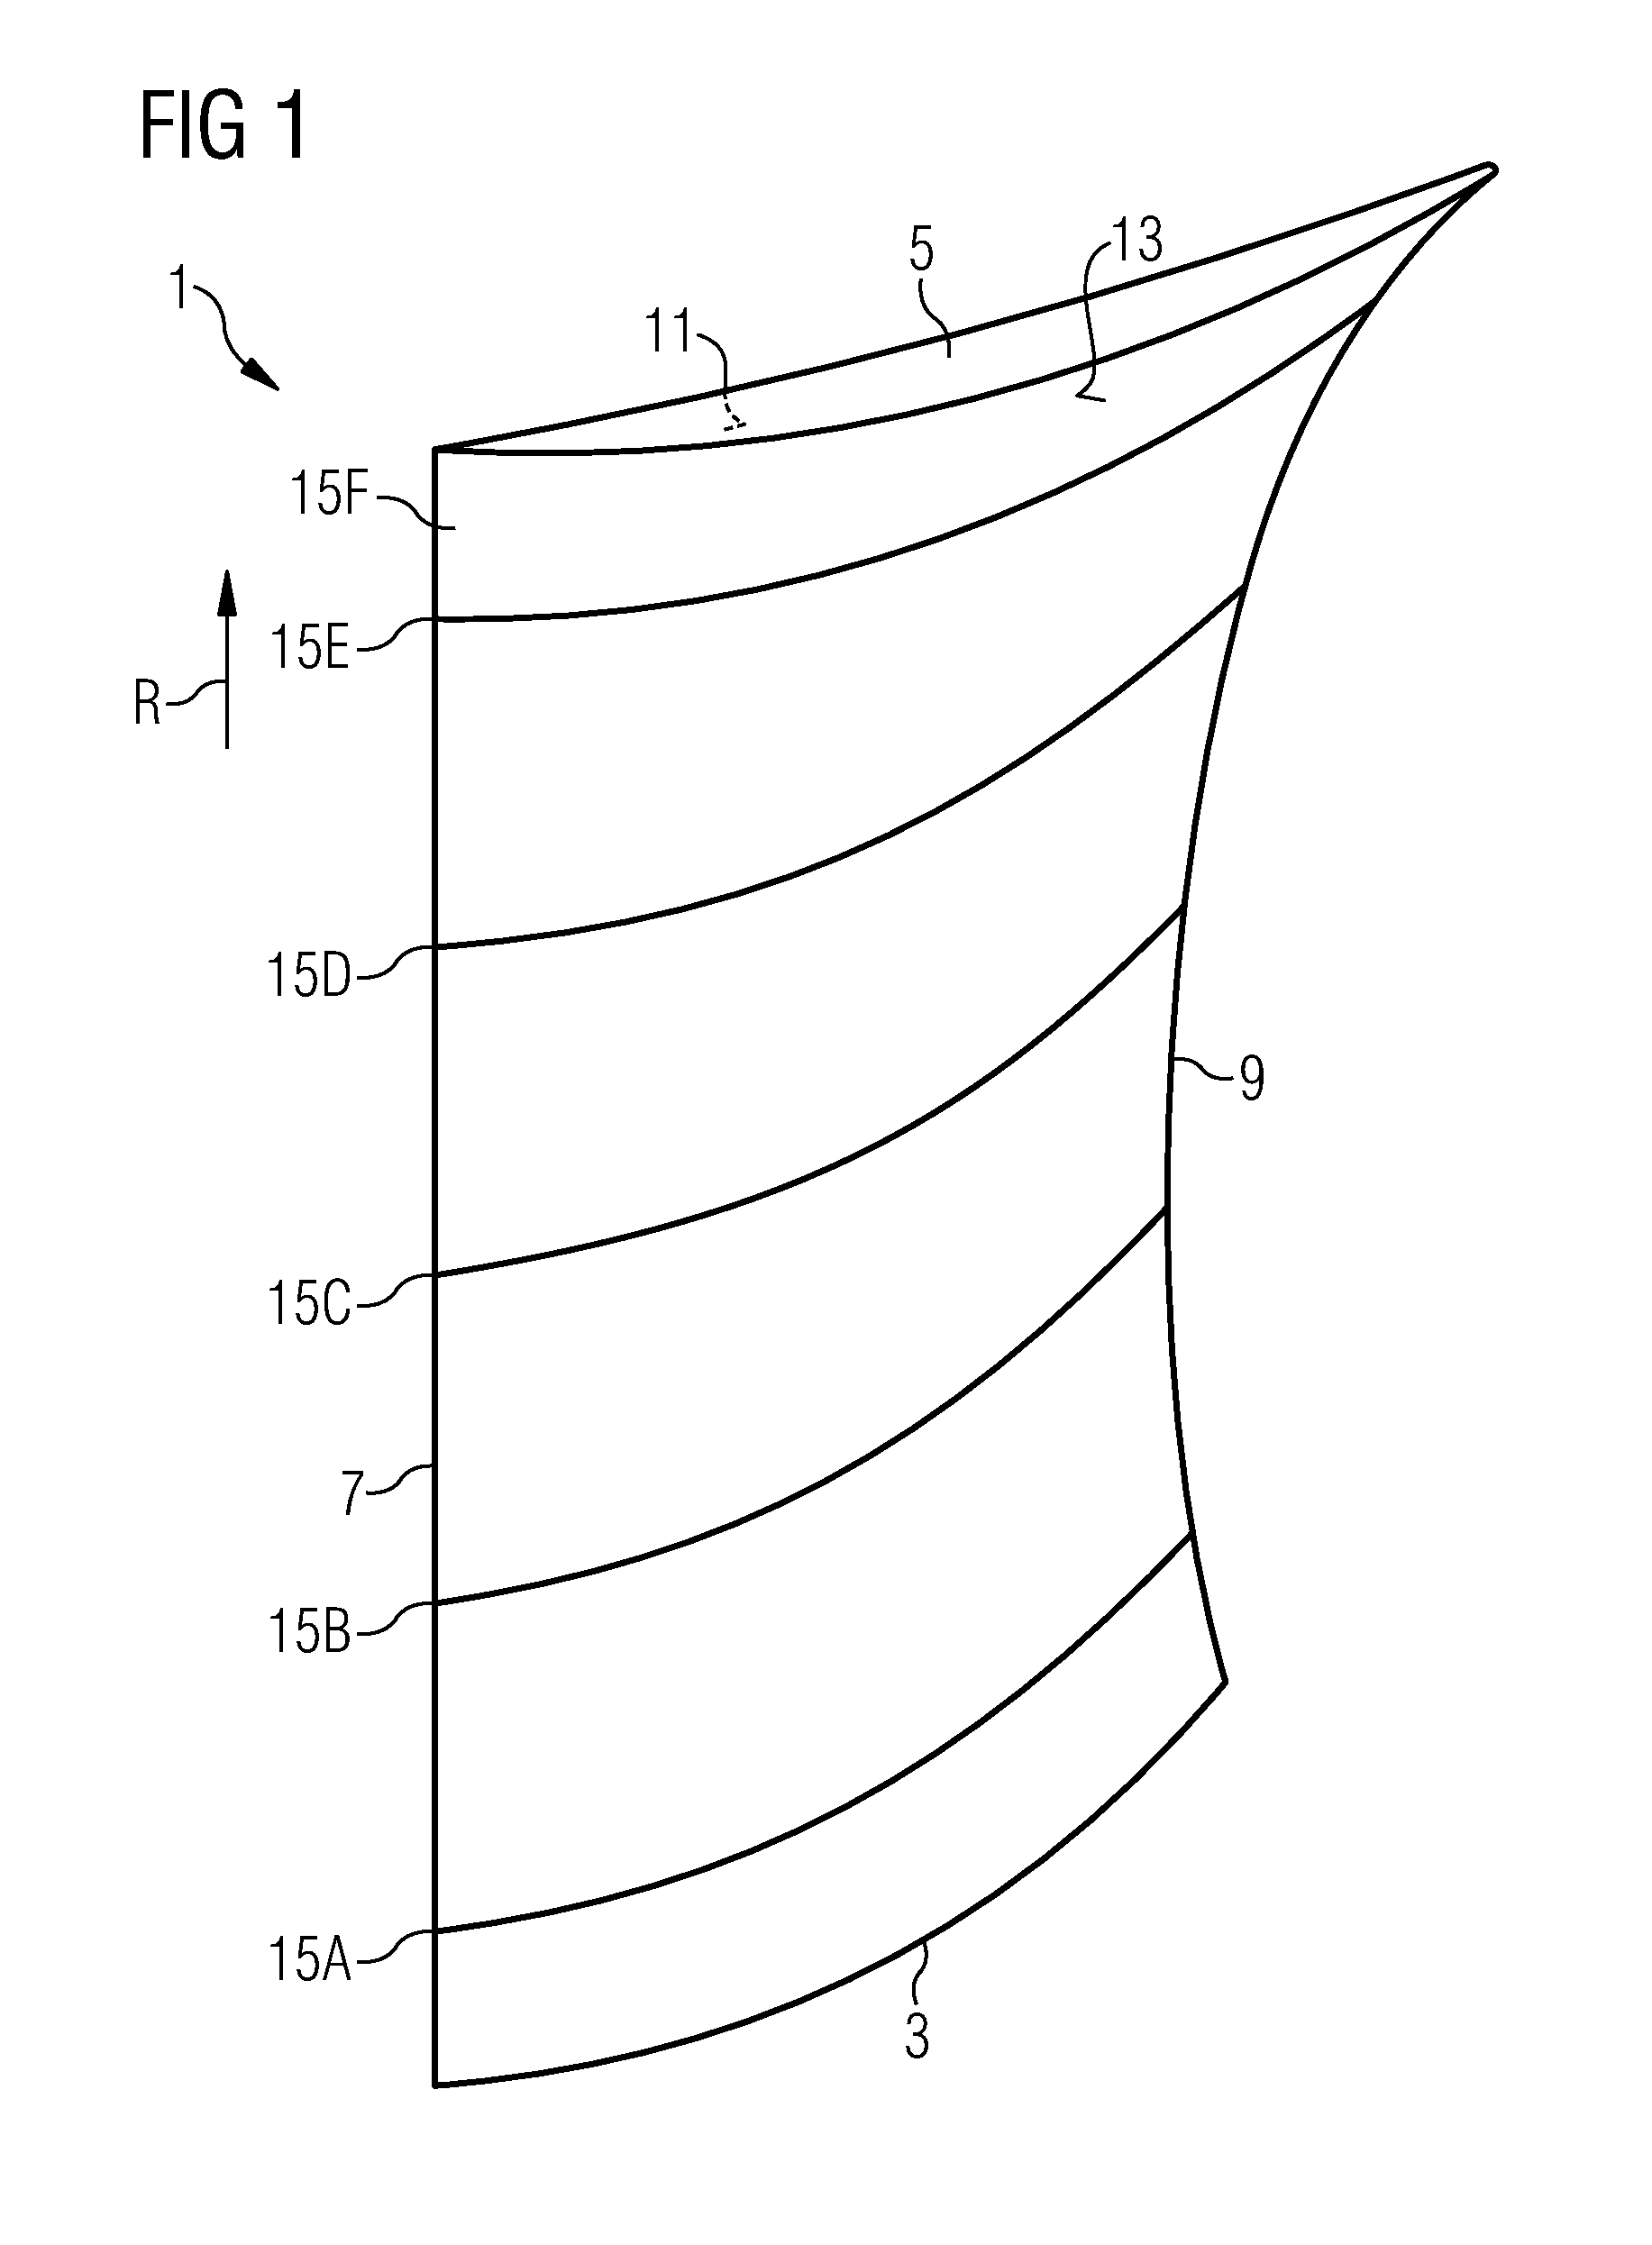 Vane or blade for an axial flow compressor